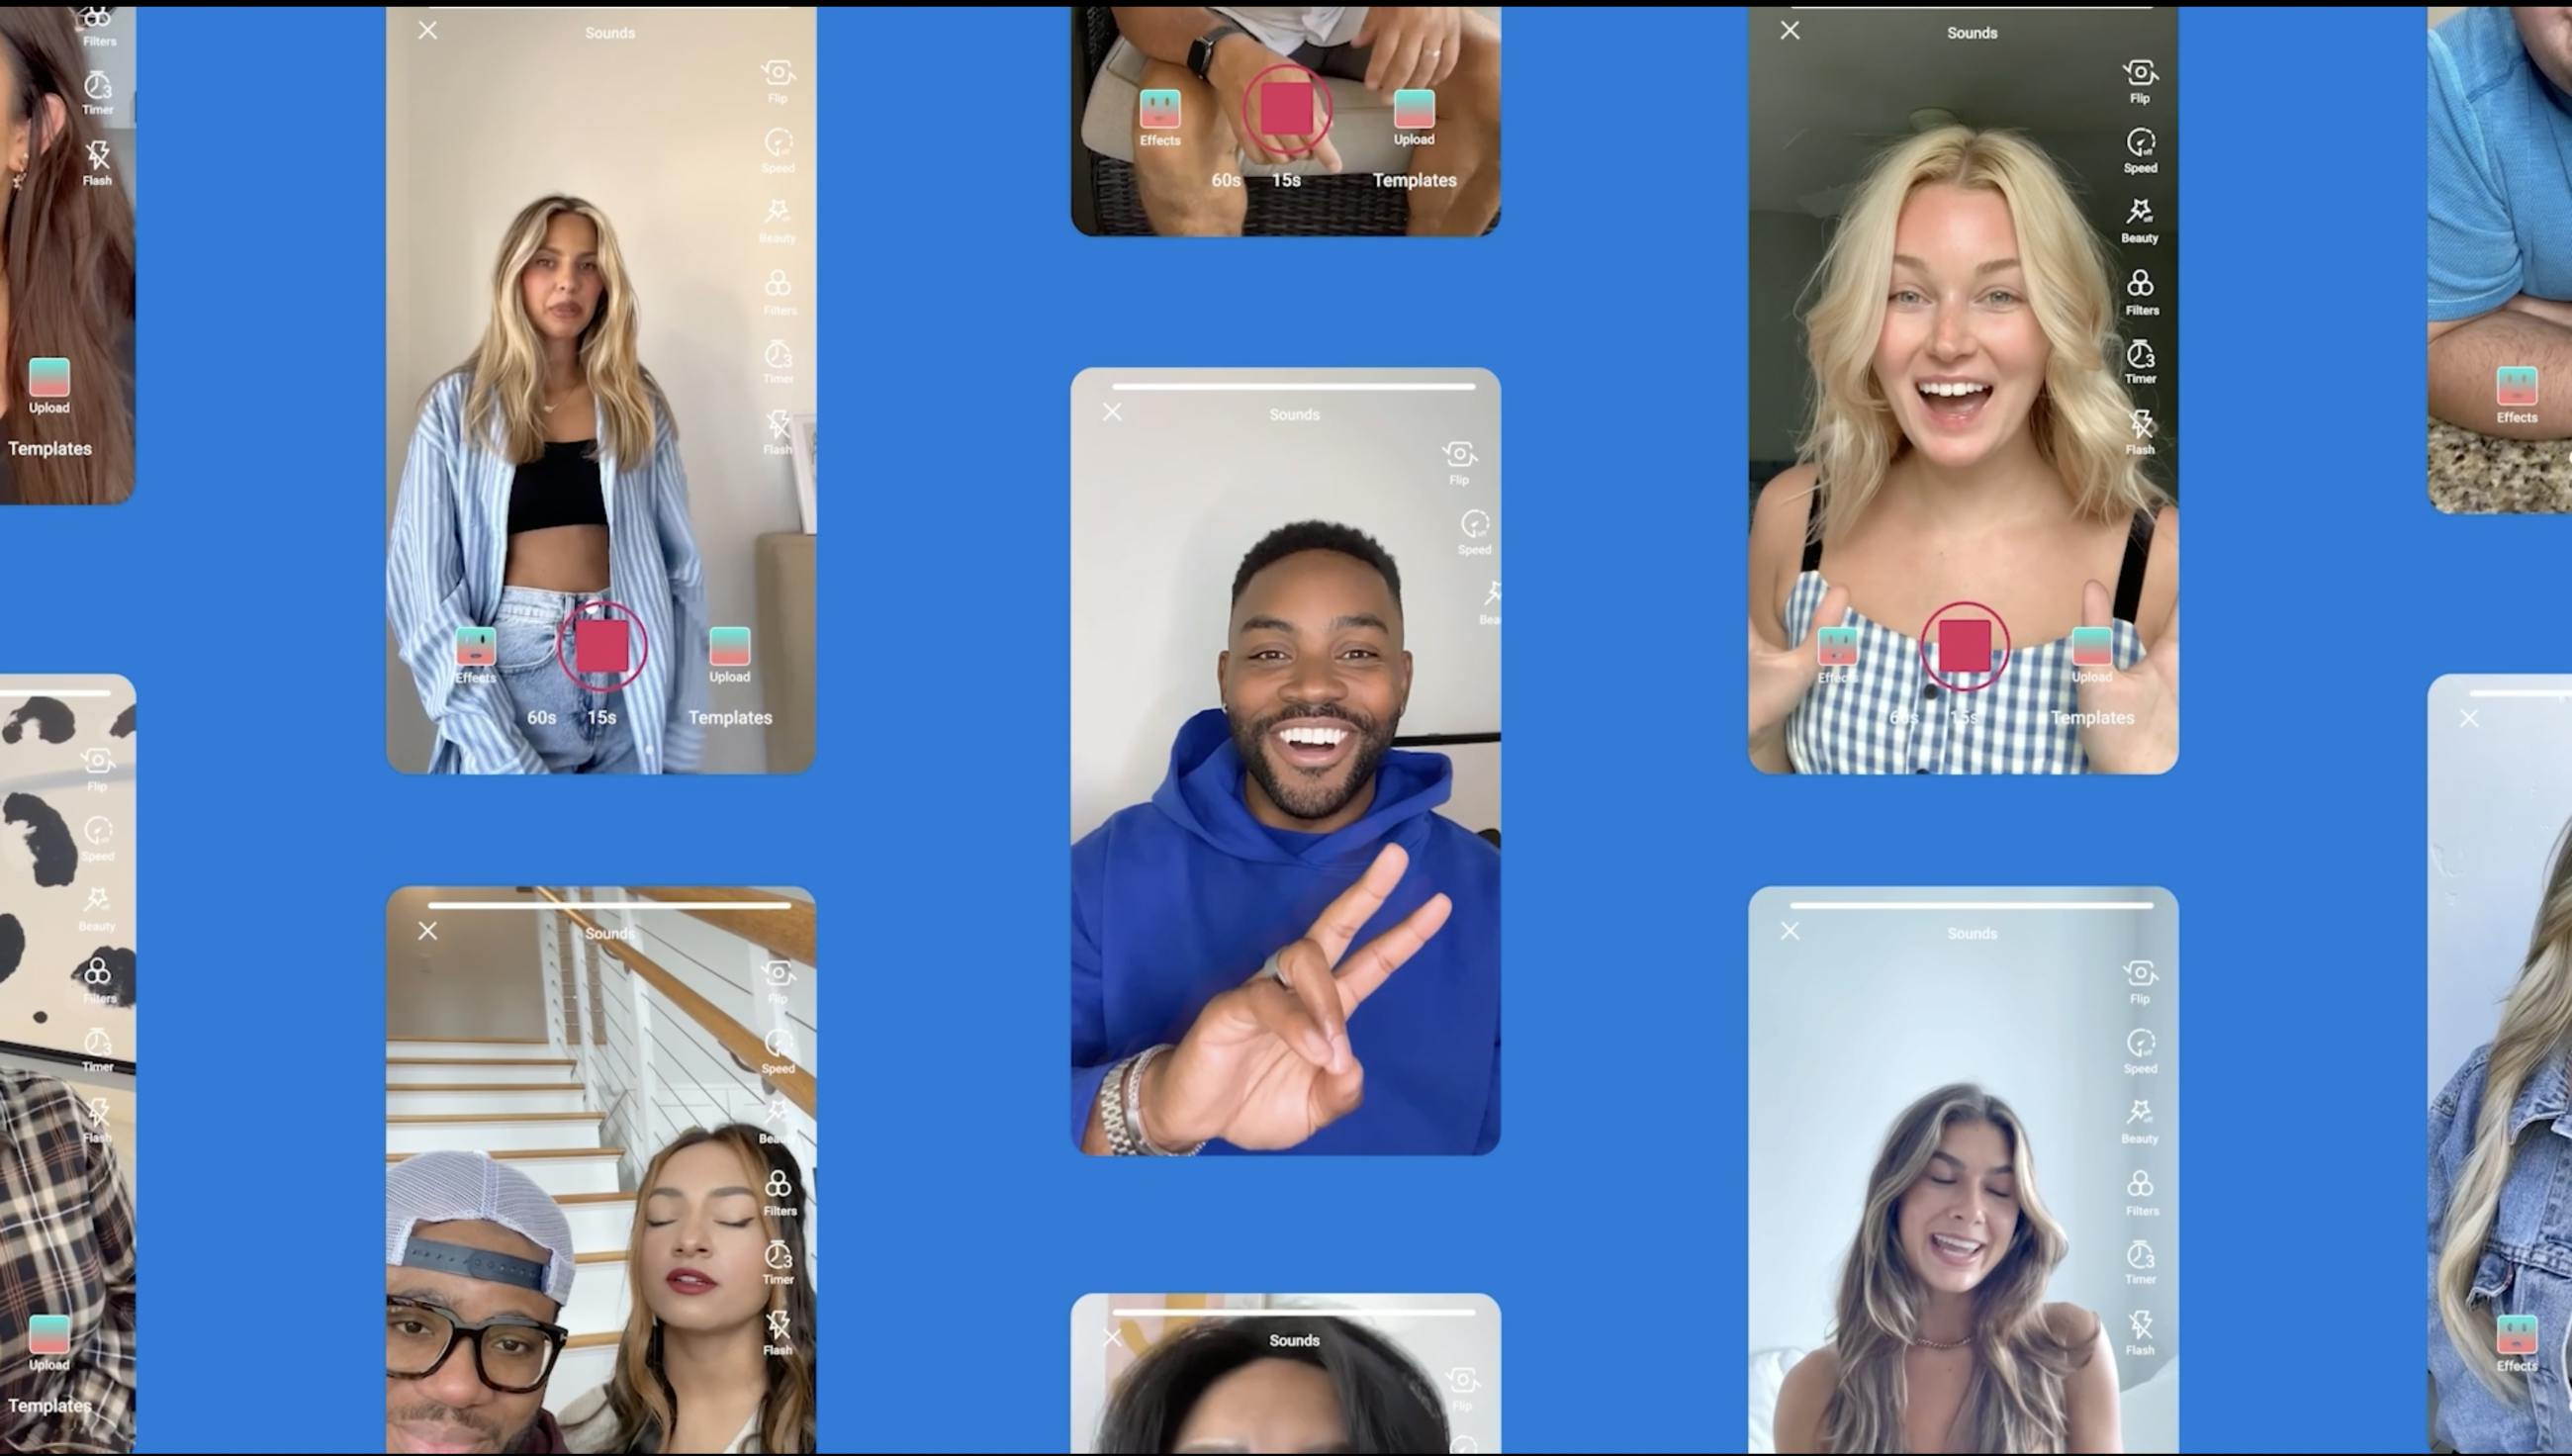 How Much Does Walmart Pay Influencers?